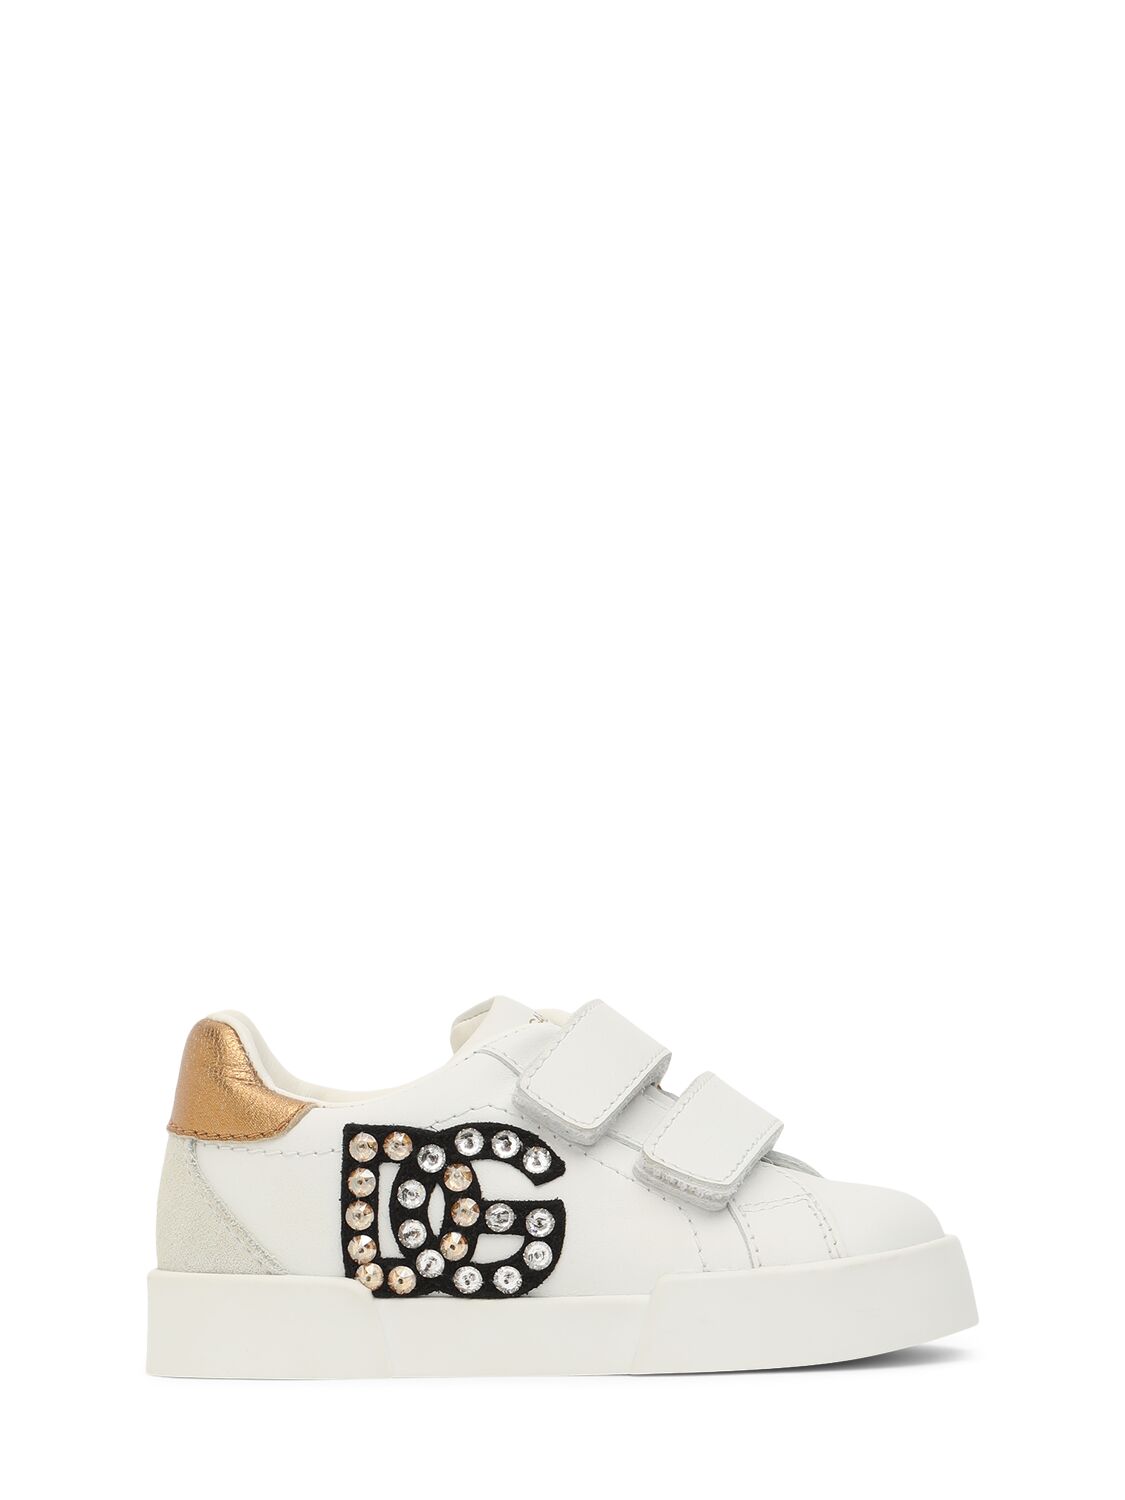 Dolce & Gabbana Embellished Logo Leather Sneakers In White/gold